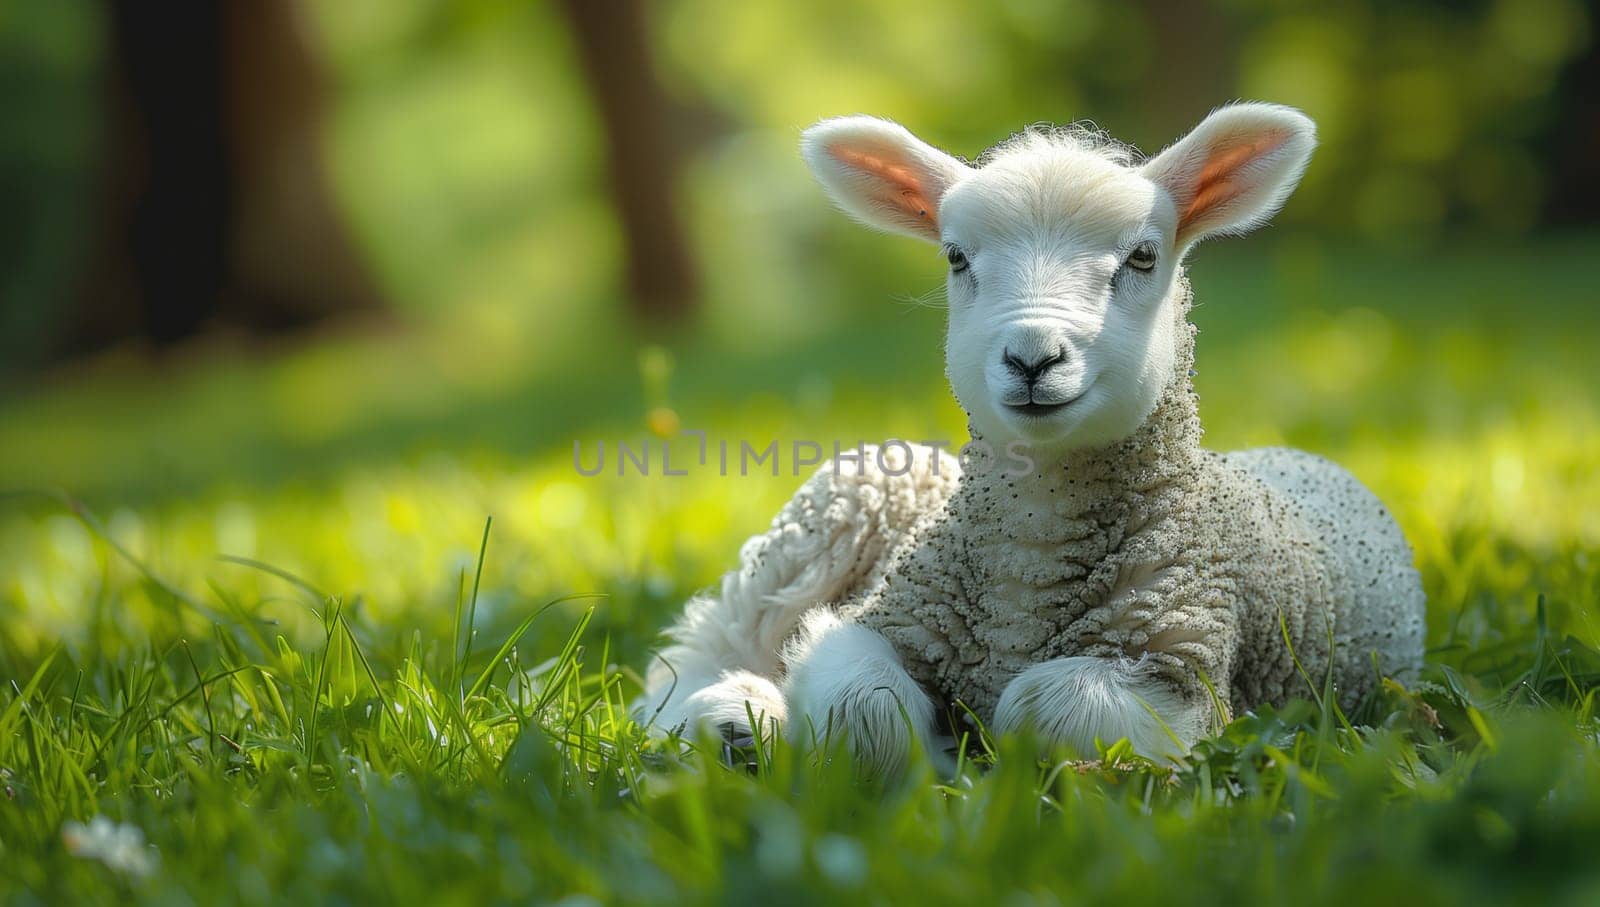 A sheep lying in the grass, gazing at the camera in a natural landscape by richwolf